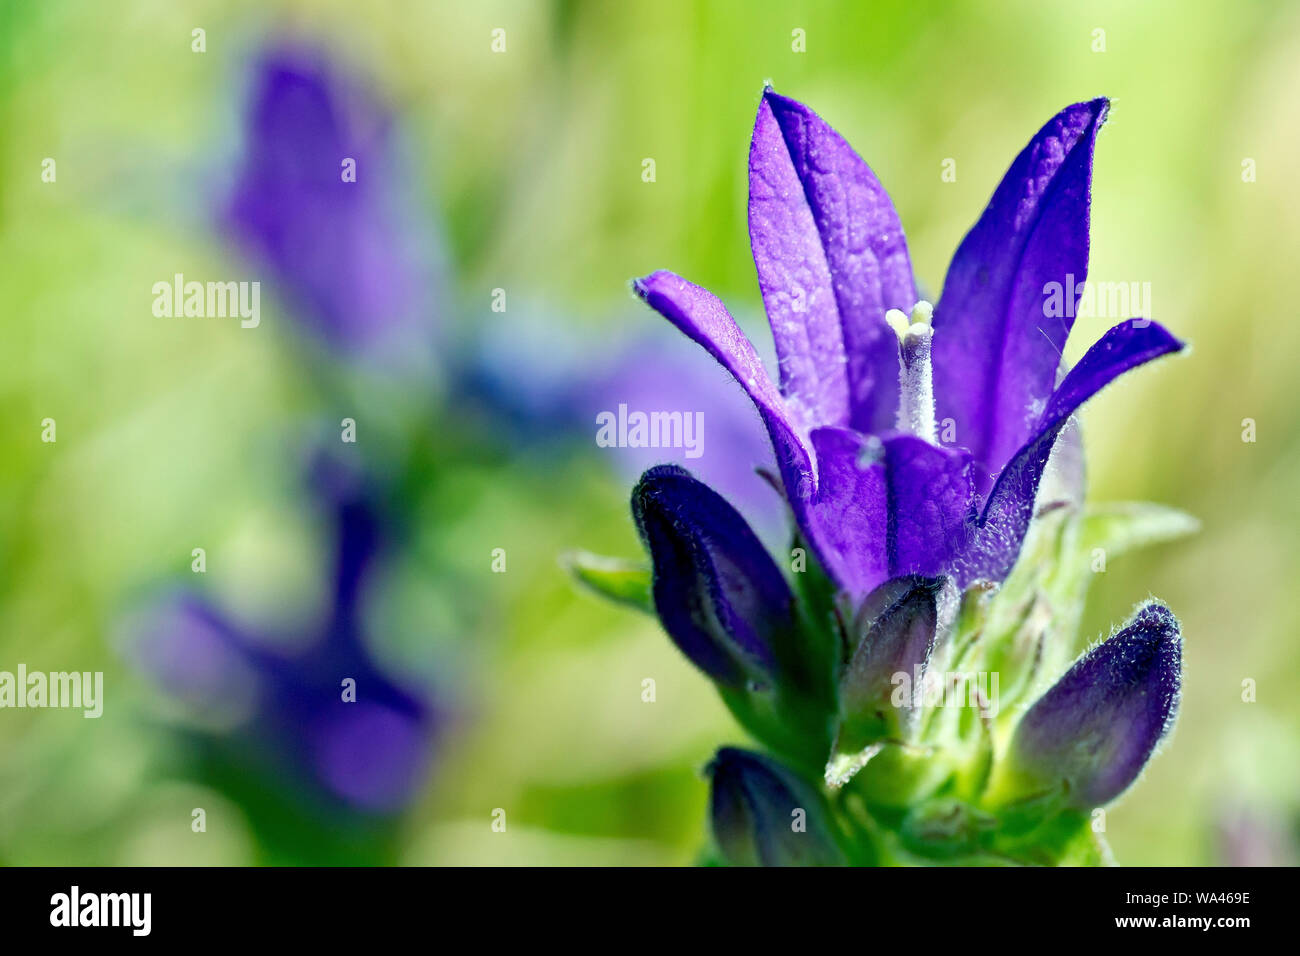 Clustered Bellflower (campanula glomerata), close up of an individual flower with buds. Stock Photo